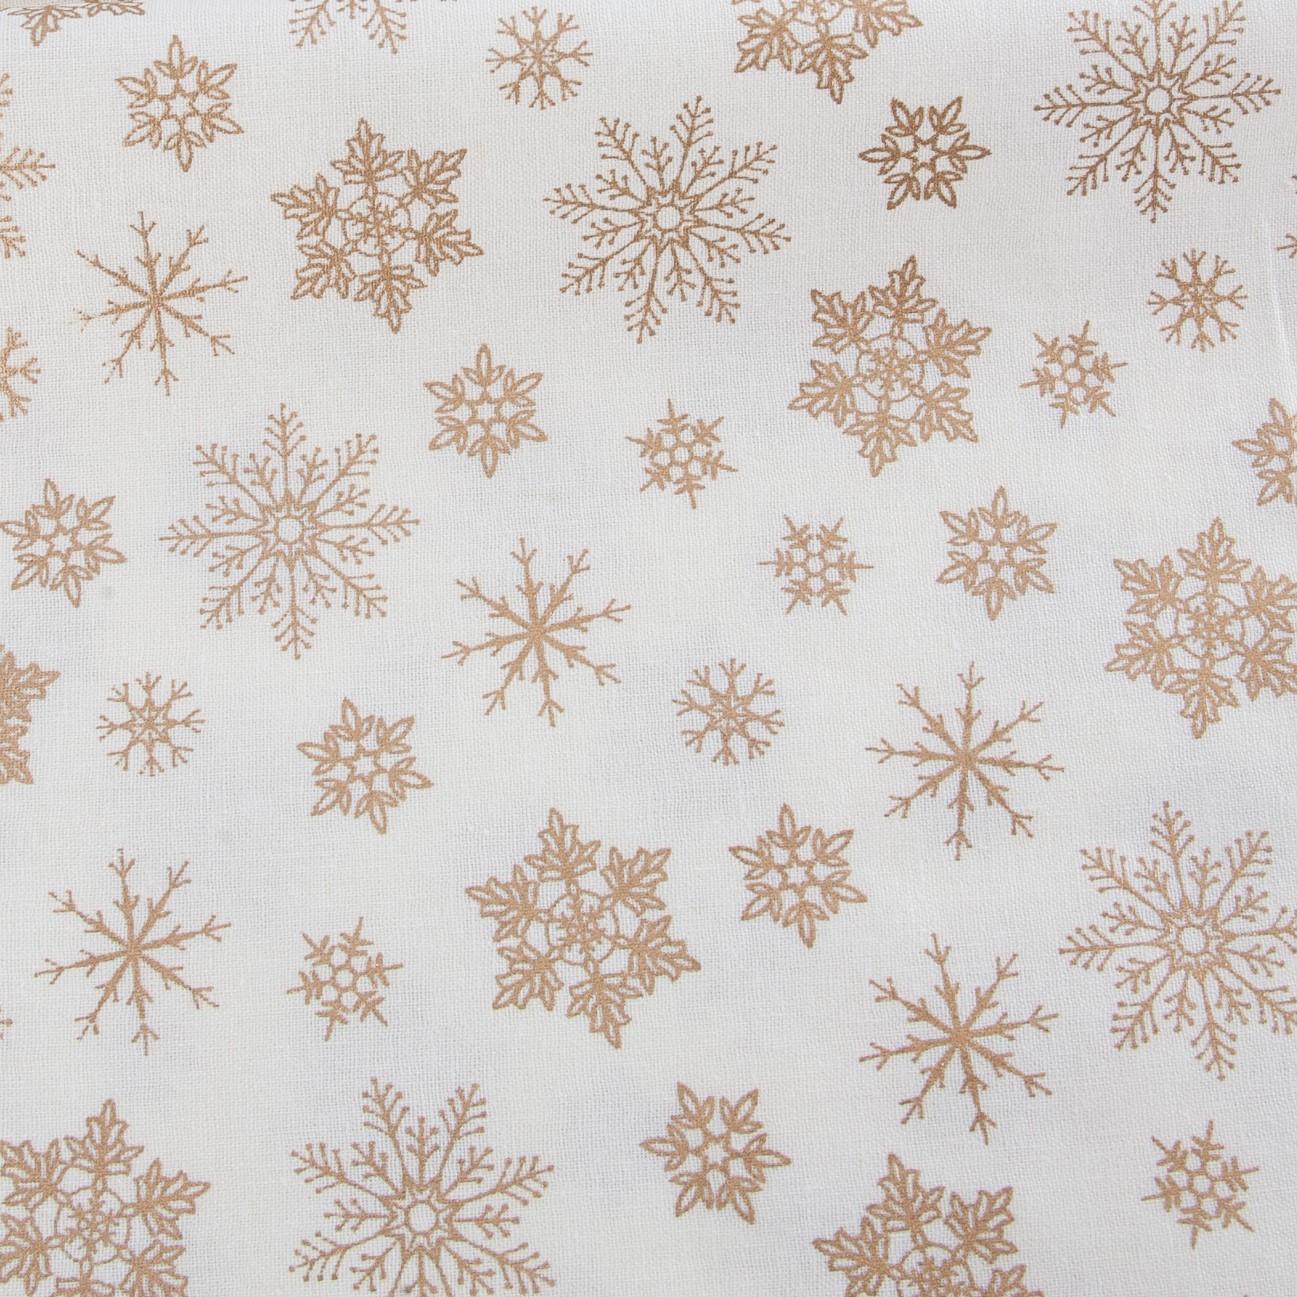 Quilting Fabric - Christmas Metallic Gold Snowflakes On Cream by The Craft Cotton Company 3268-04